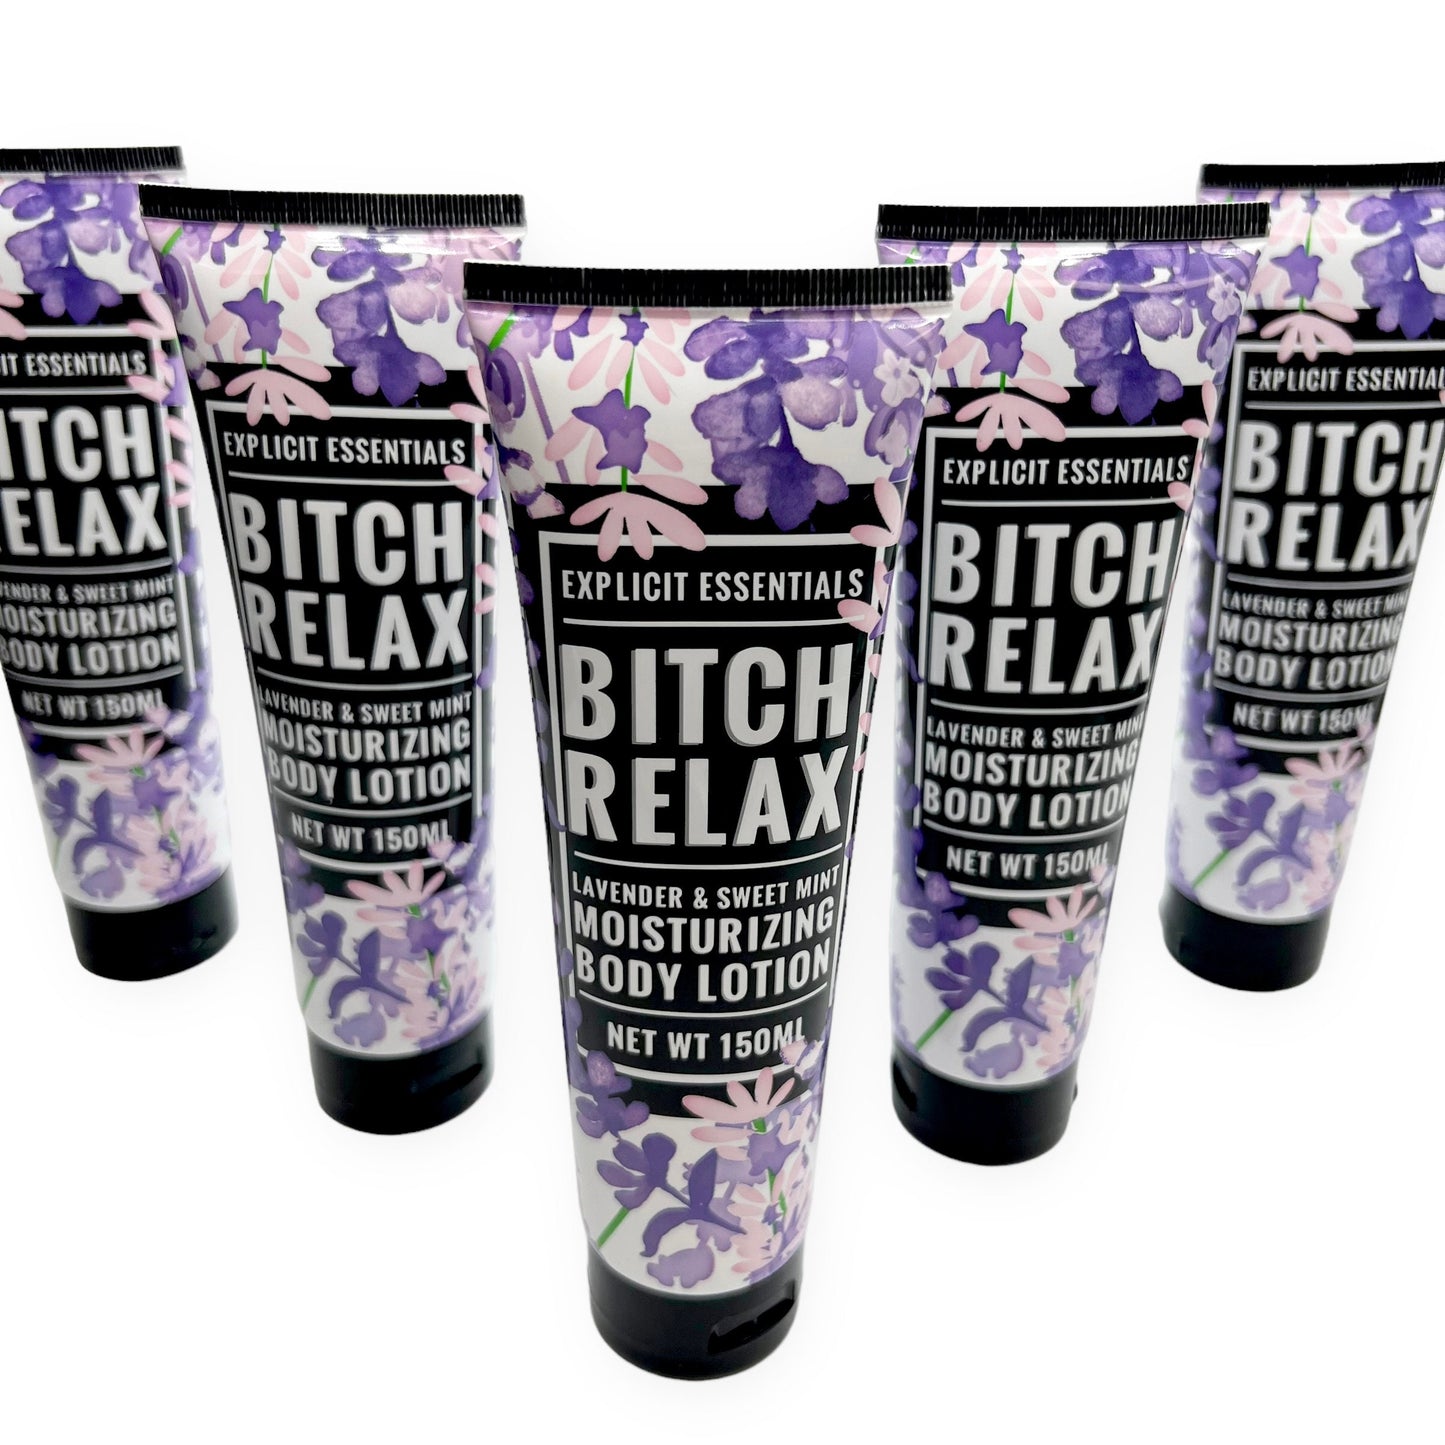 Bitch Relax Hand and Body Lotion